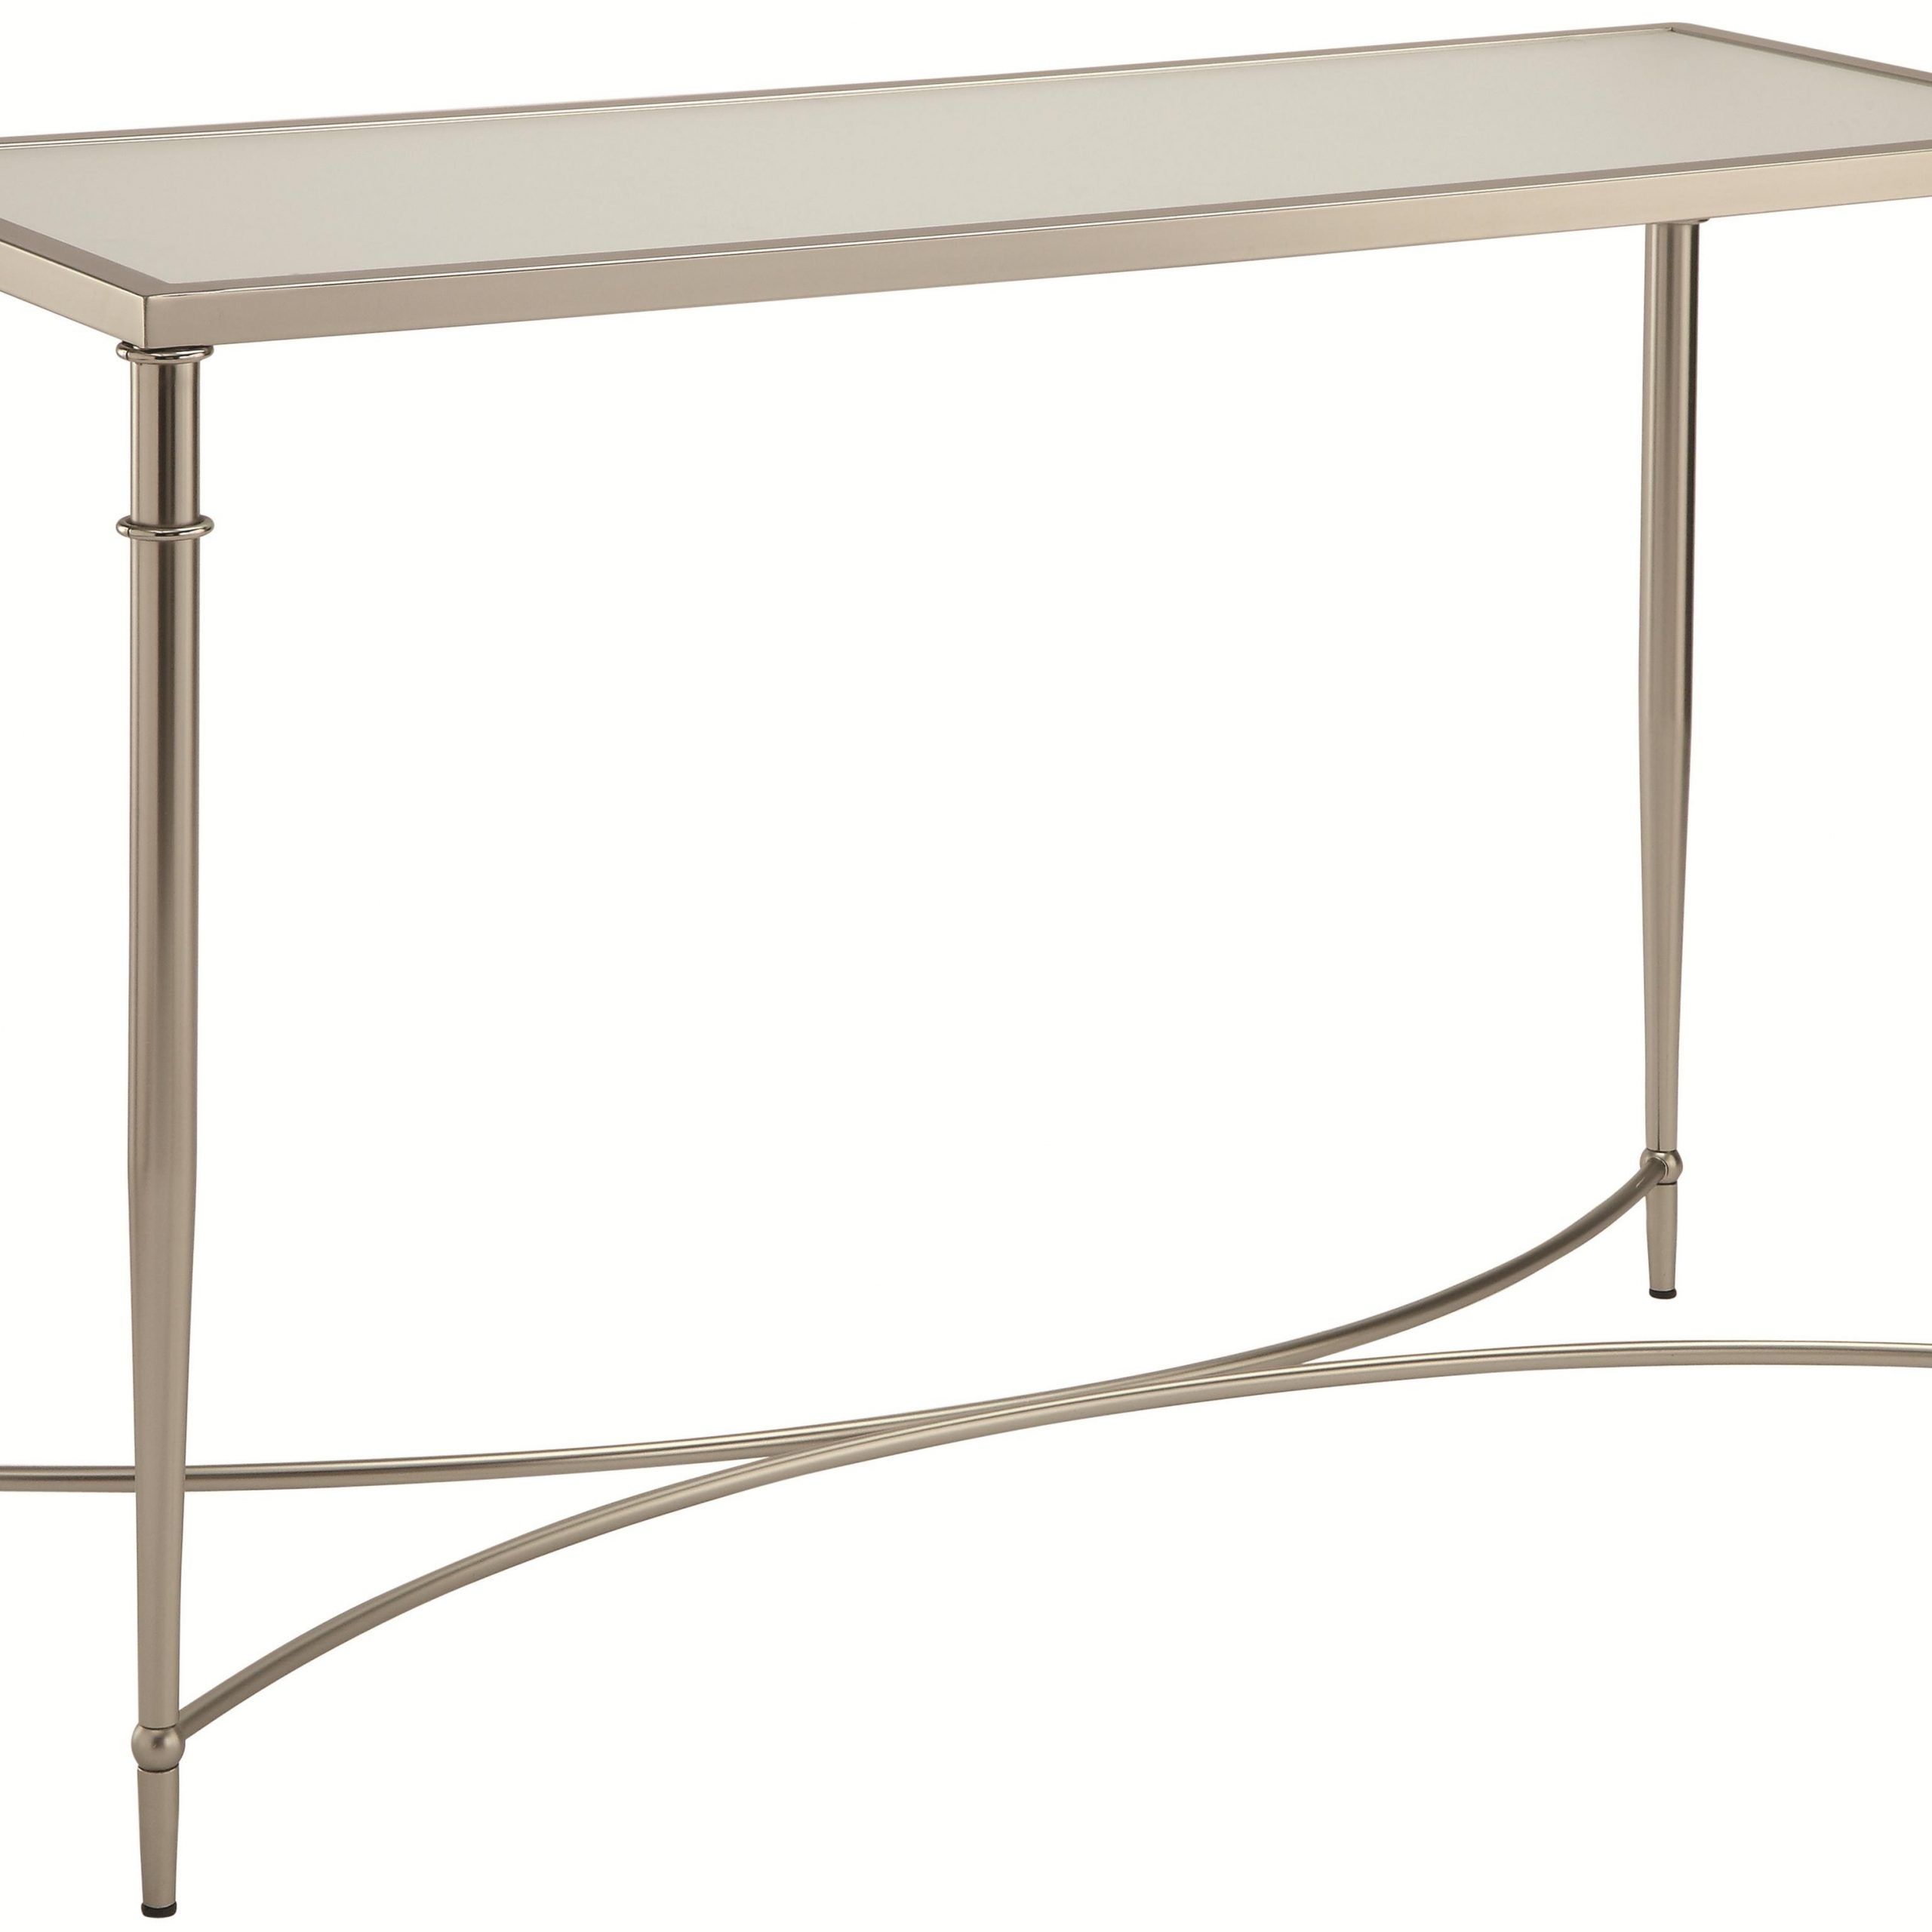 70334 Sofa Table With Metal Legs And Frosted Glass Top | Quality With Regard To Large Frosted Glass Aluminum Desks (View 7 of 15)